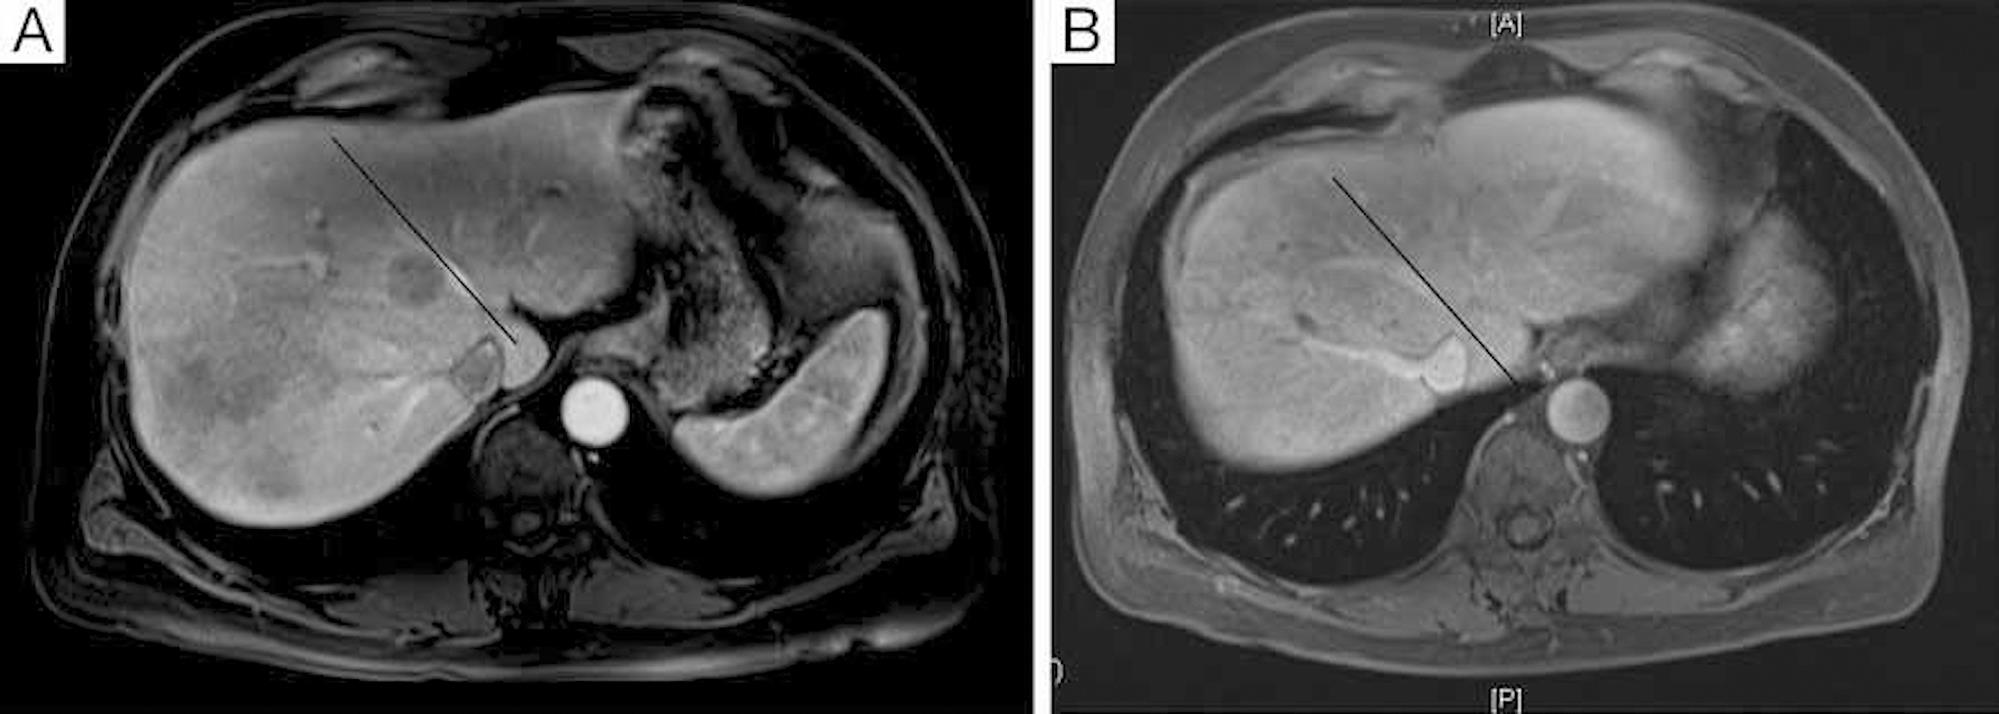 (A) Pre-portal vein embolization of right lobe of liver to induce hypertrophy of left lobe of liver. (B) Six weeks post-portal vein embolization of right lobe of liver to induce hypertrophy of left lobe of liver.